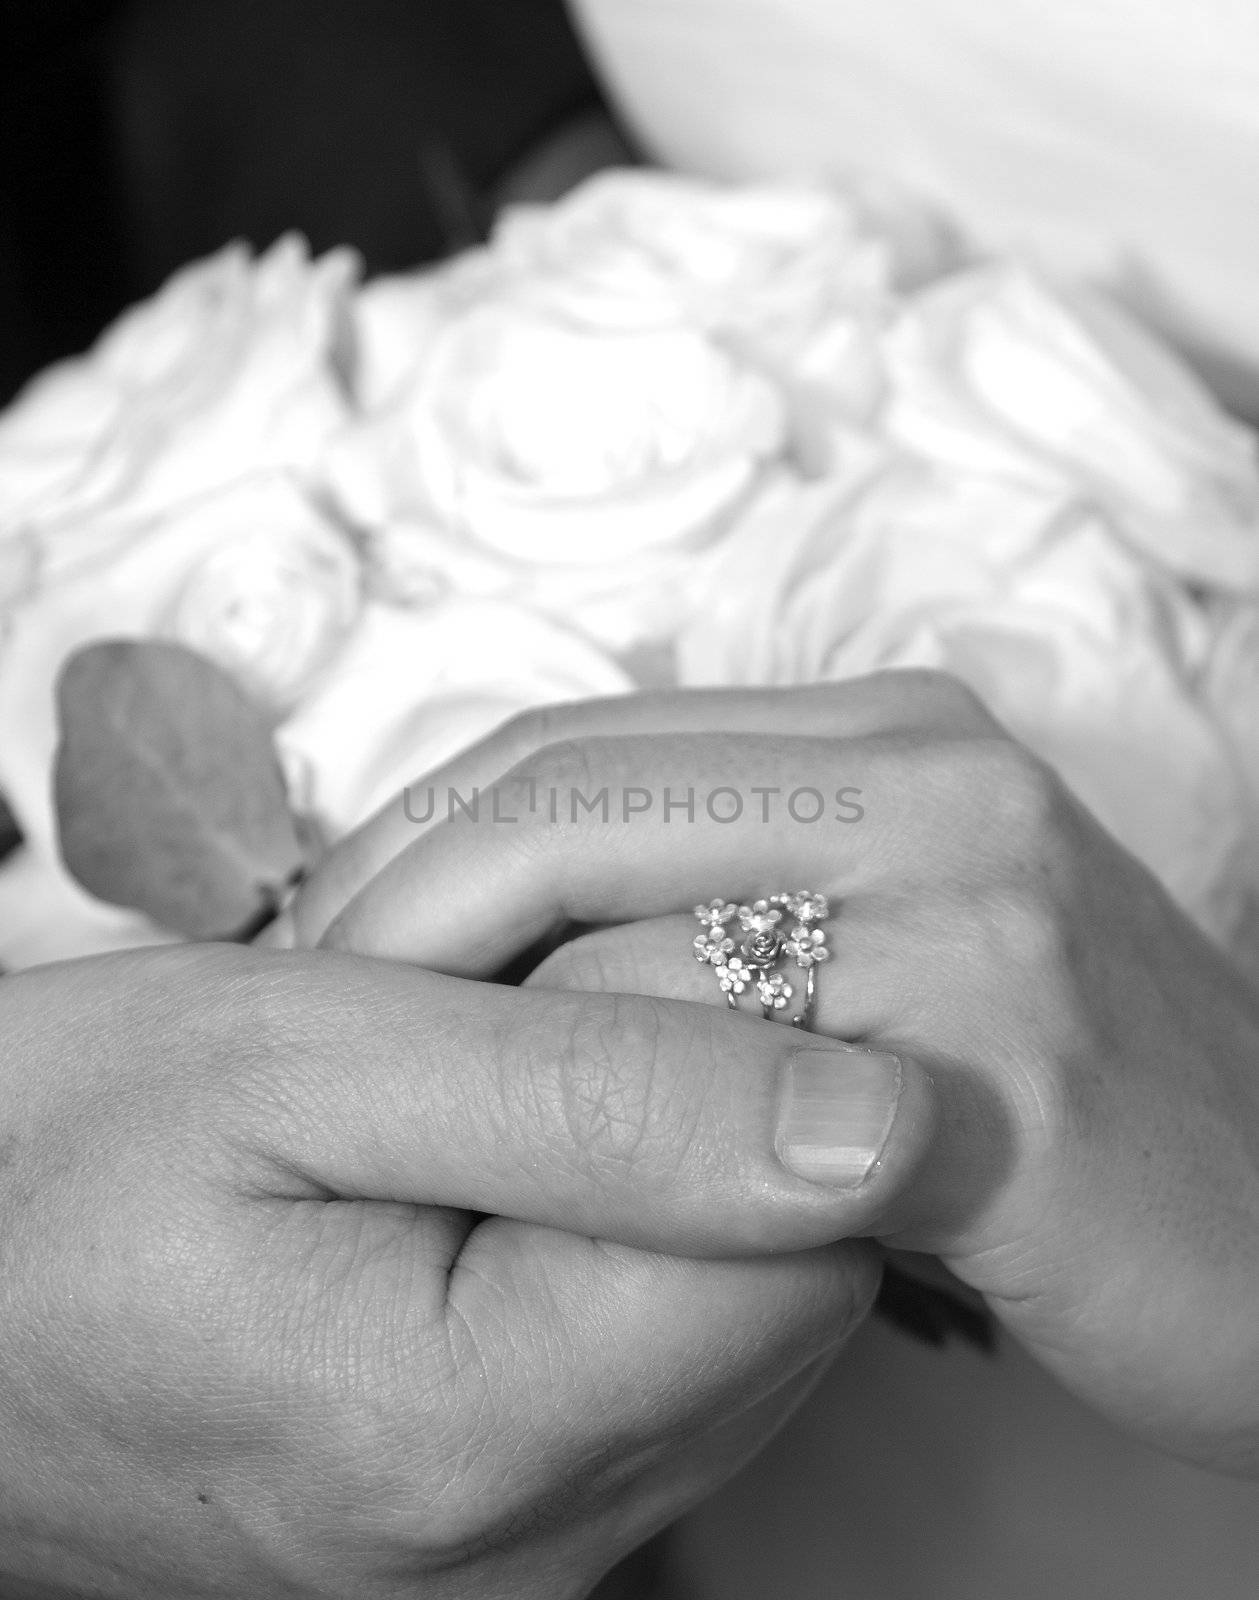 Detail of bride and groom's hands showing wedding band